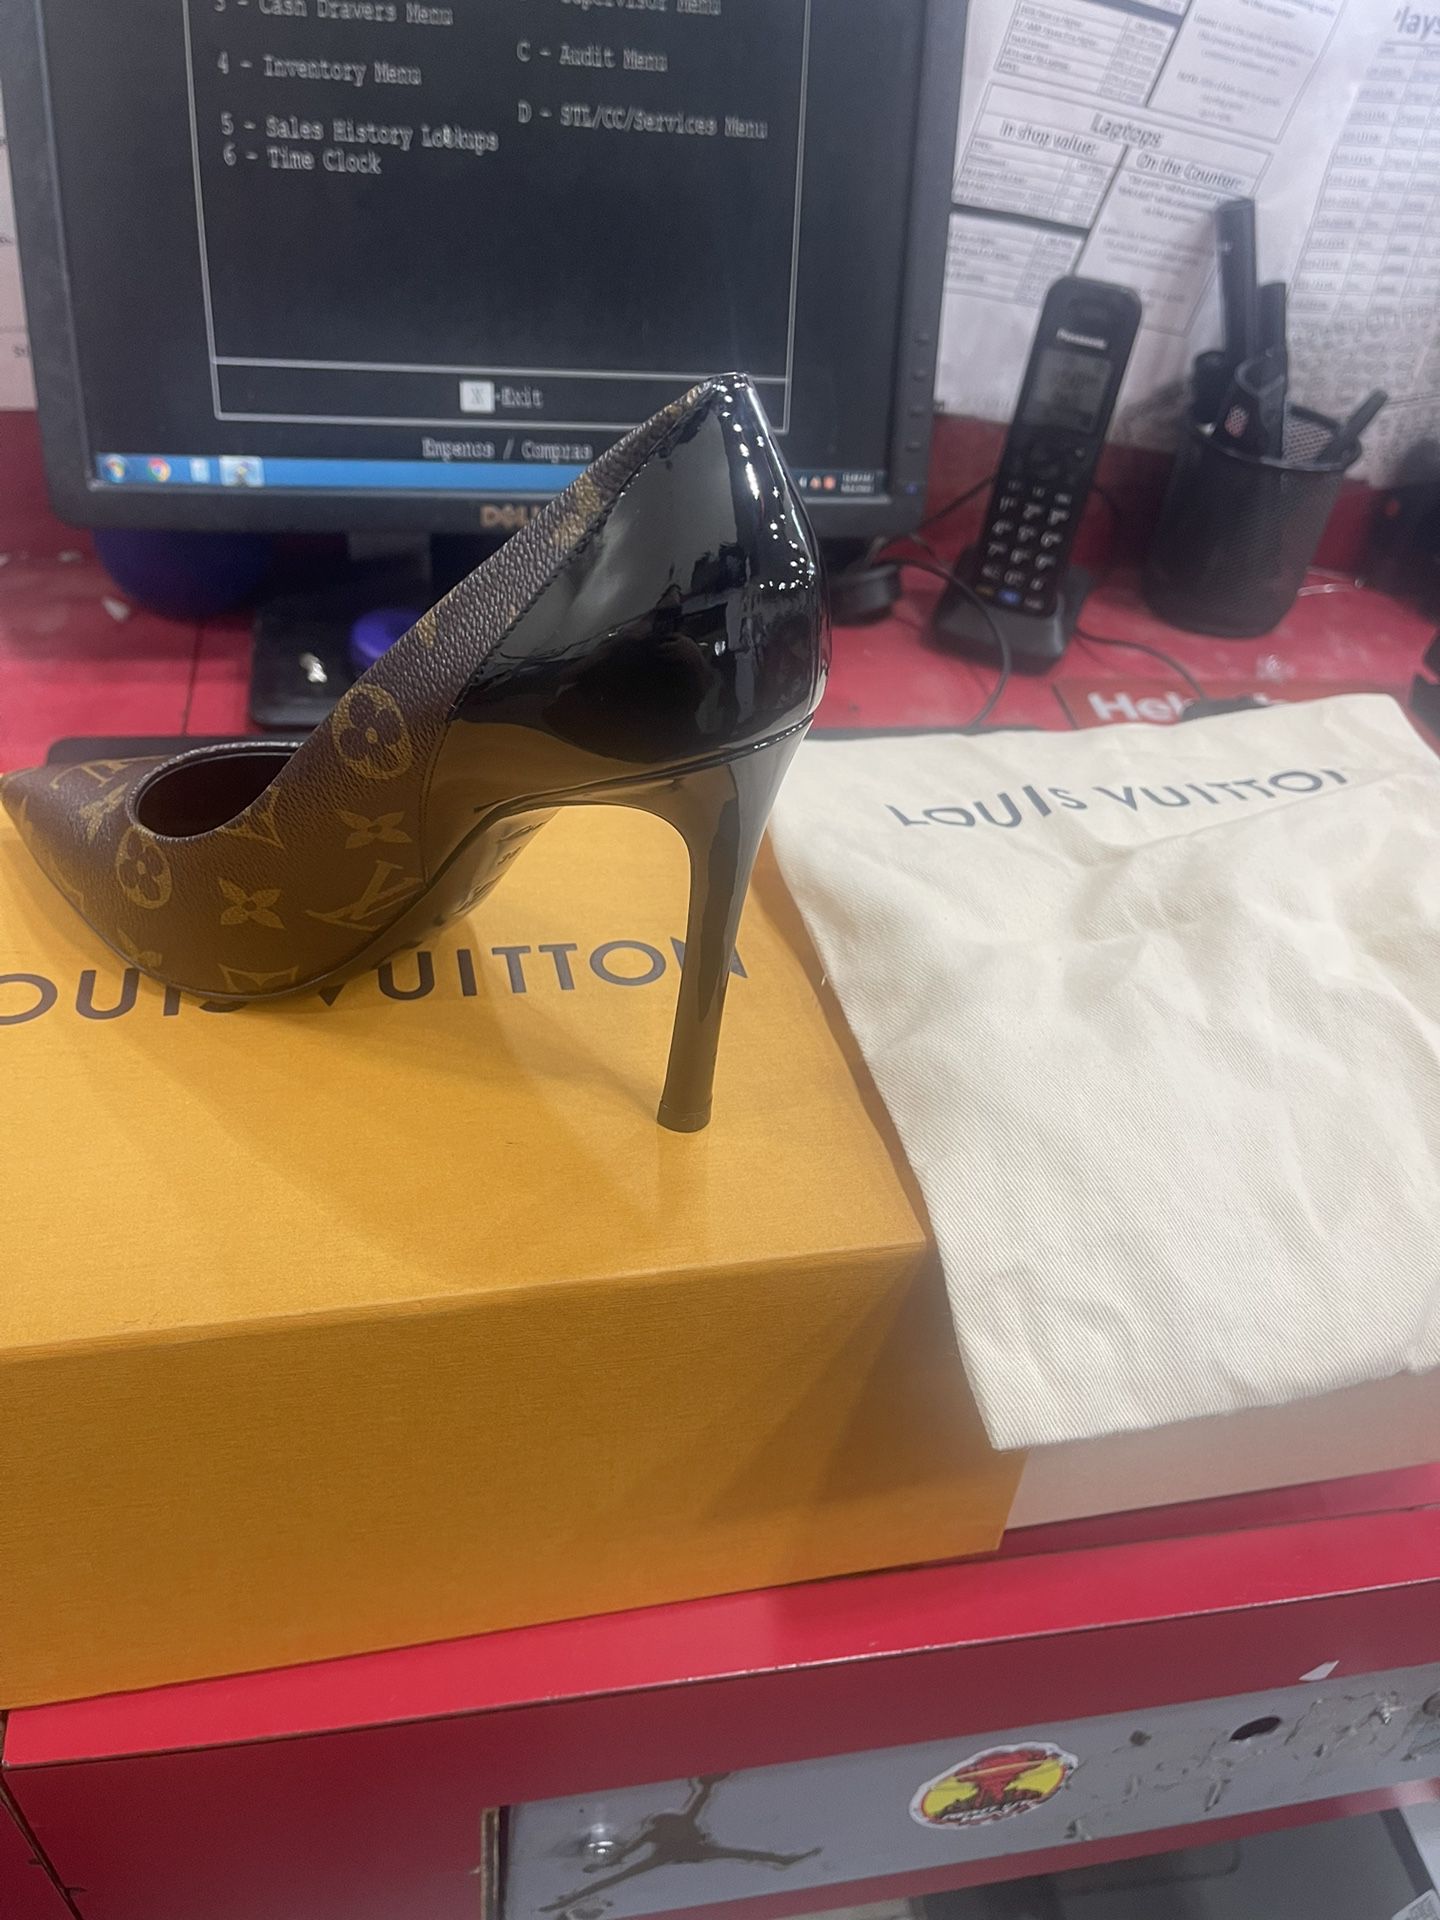 Louis Vuitton Shoes / Heels / Pumps - Authenticated for Sale in Houston, TX  - OfferUp